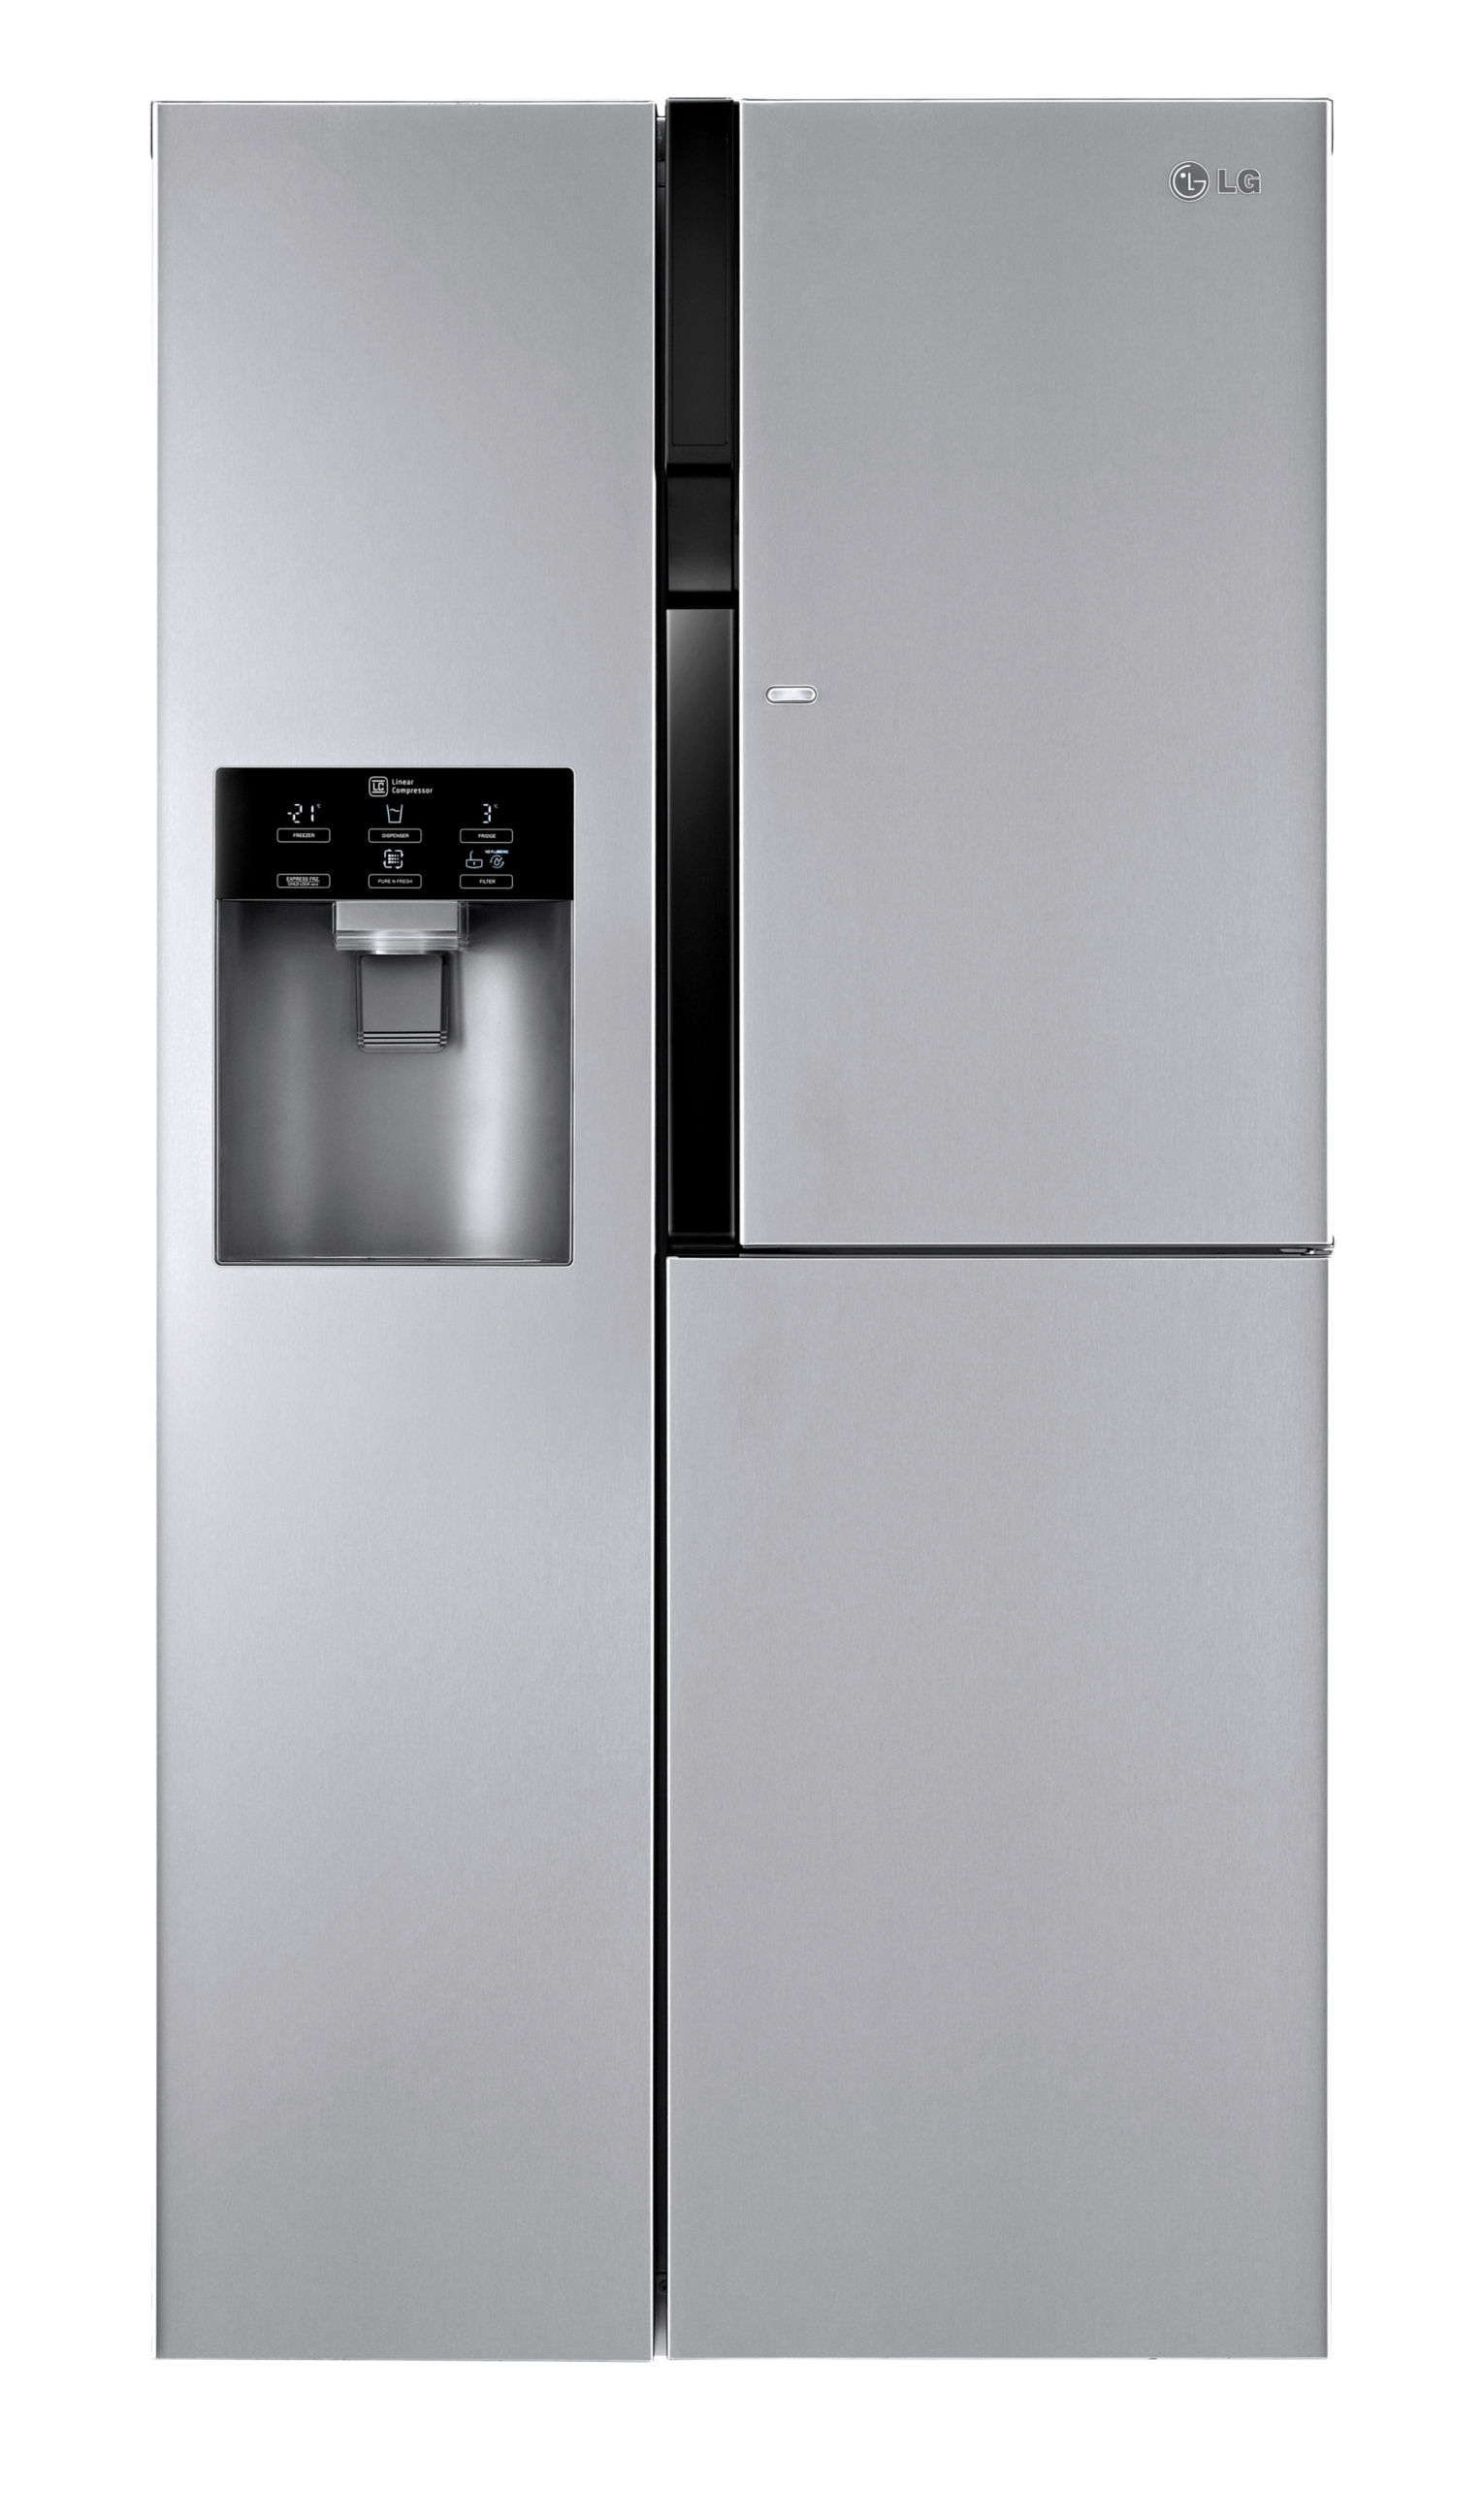 A front view of LG's side-by-side refrigerator with Door-in-Door system